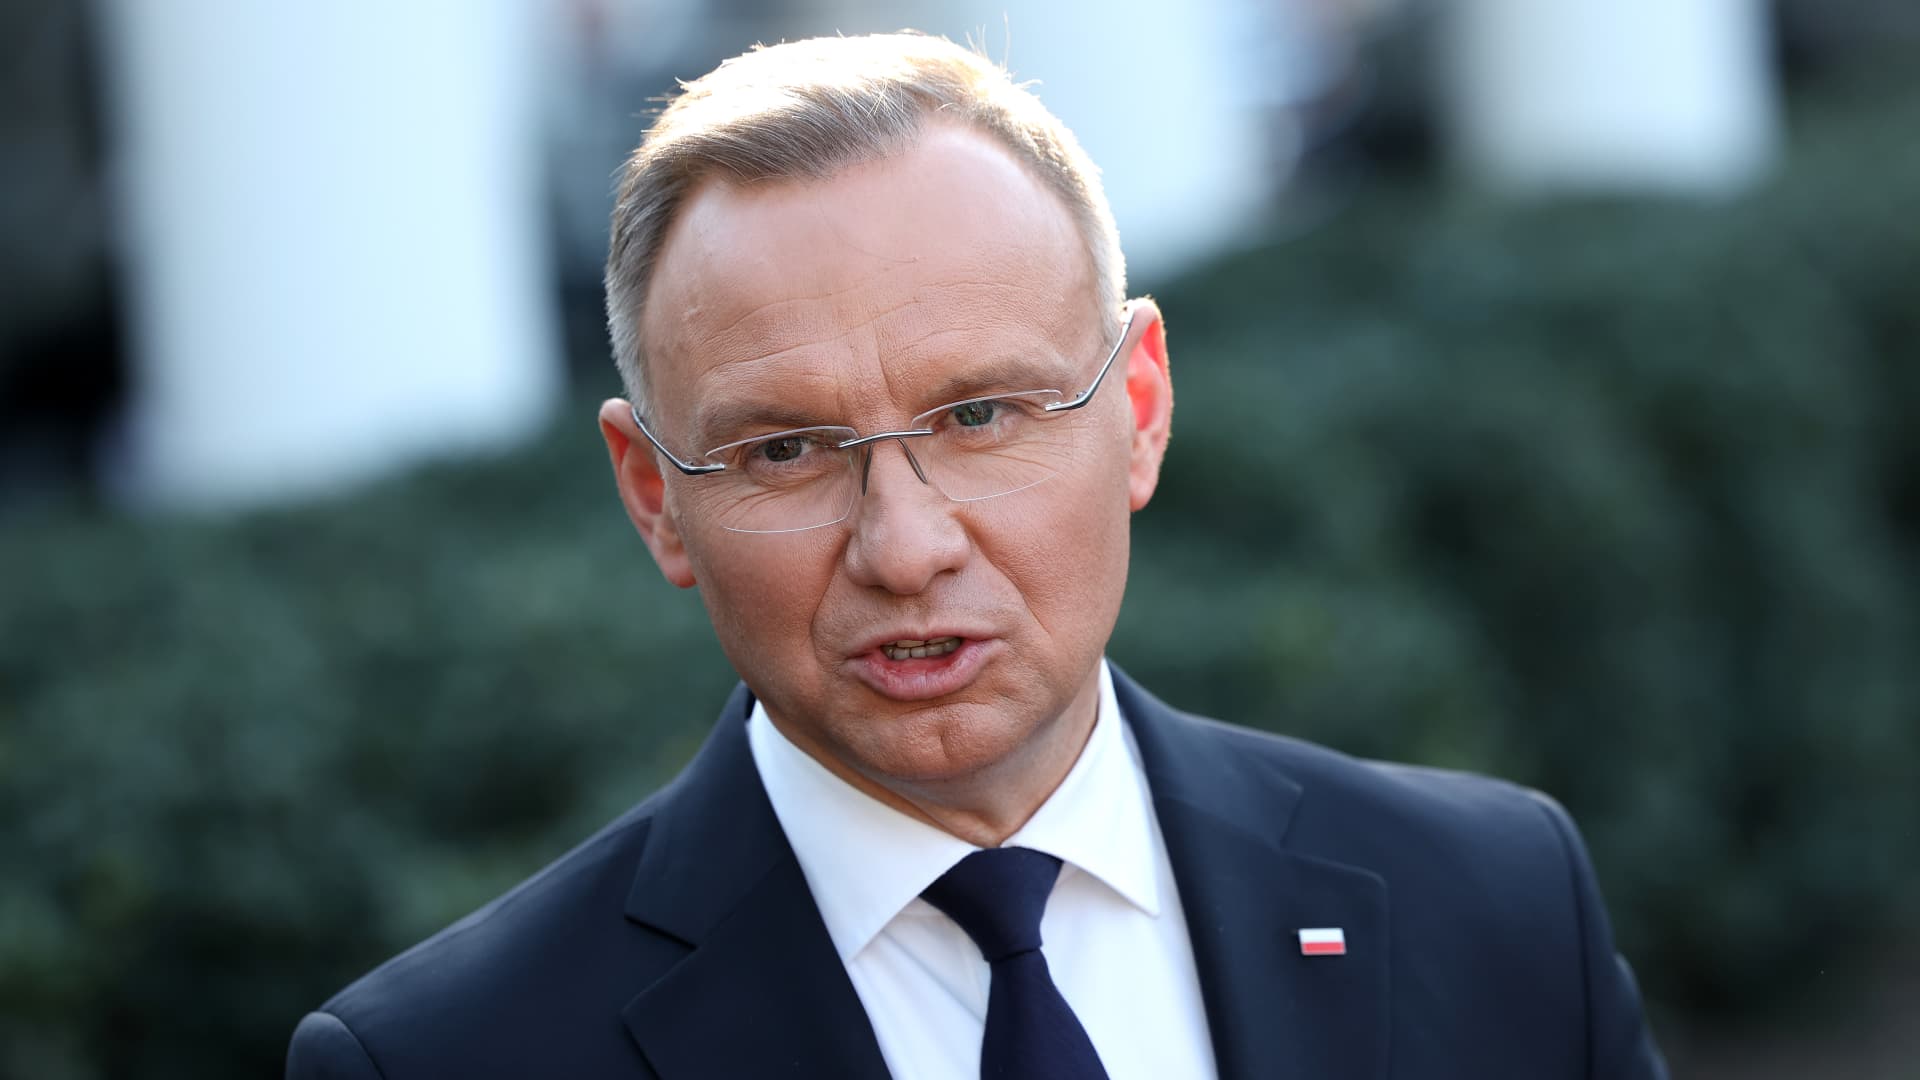 ‘Alarm bells are ringing’: Poland’s president says NATO must urgently ramp up defense spending